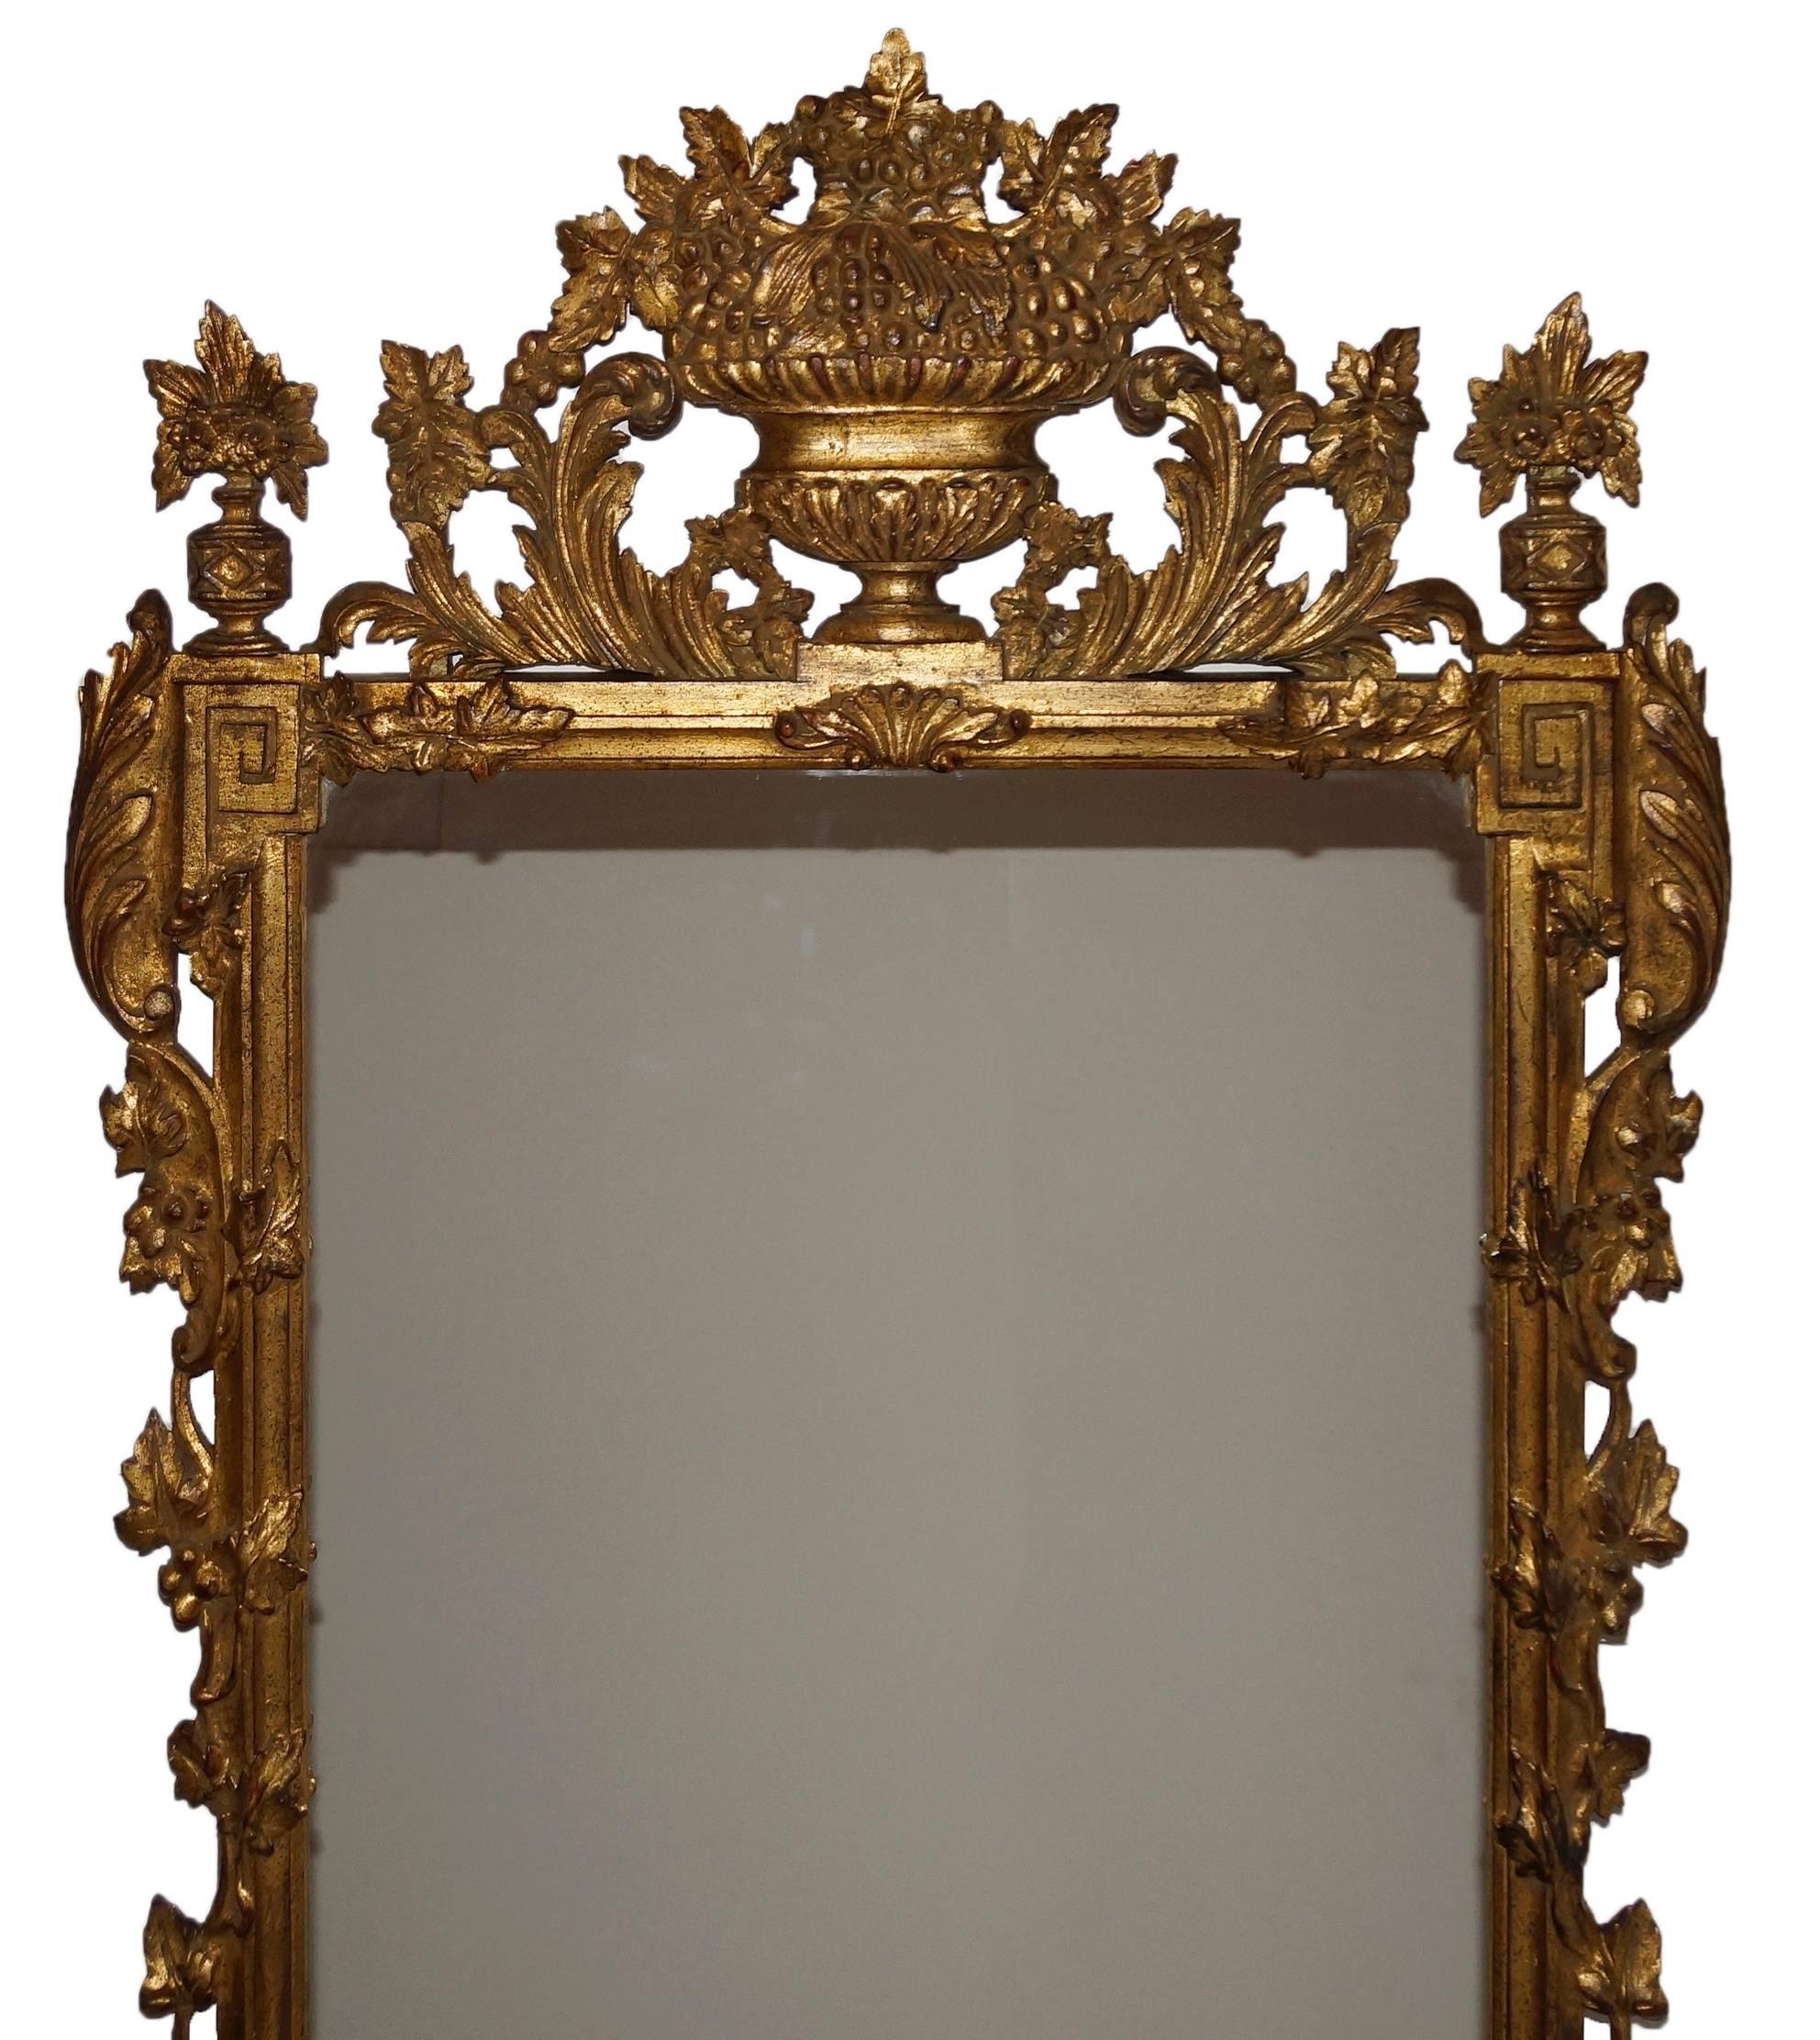 Highly ornamented Italian giltwood mirror having beautifully carved details throughout. Mirror is surmounted by an exuberant urn form crest with foliate and grape motifs. Foliate motifs continue throughout with acanthus leaves and grapevines